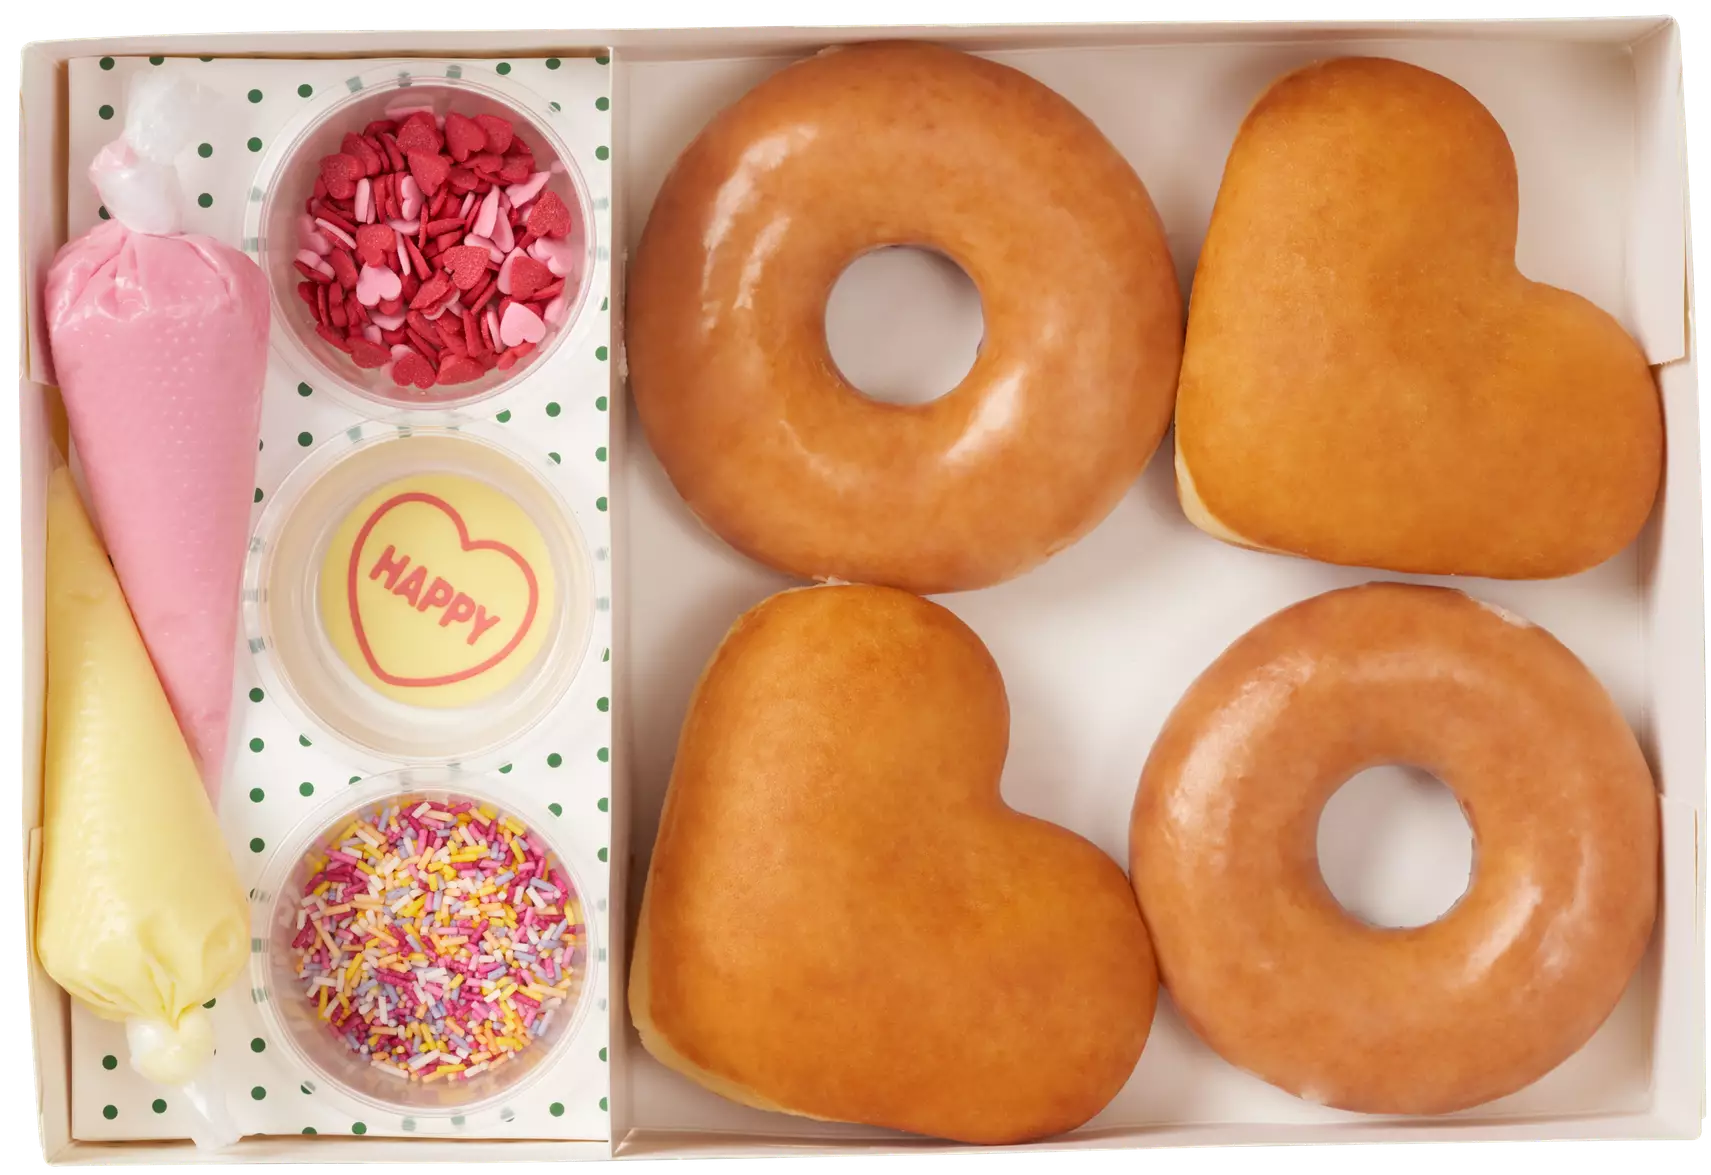 You can even decorate your own at home with the Krispy Kreme Love Creations Kit (